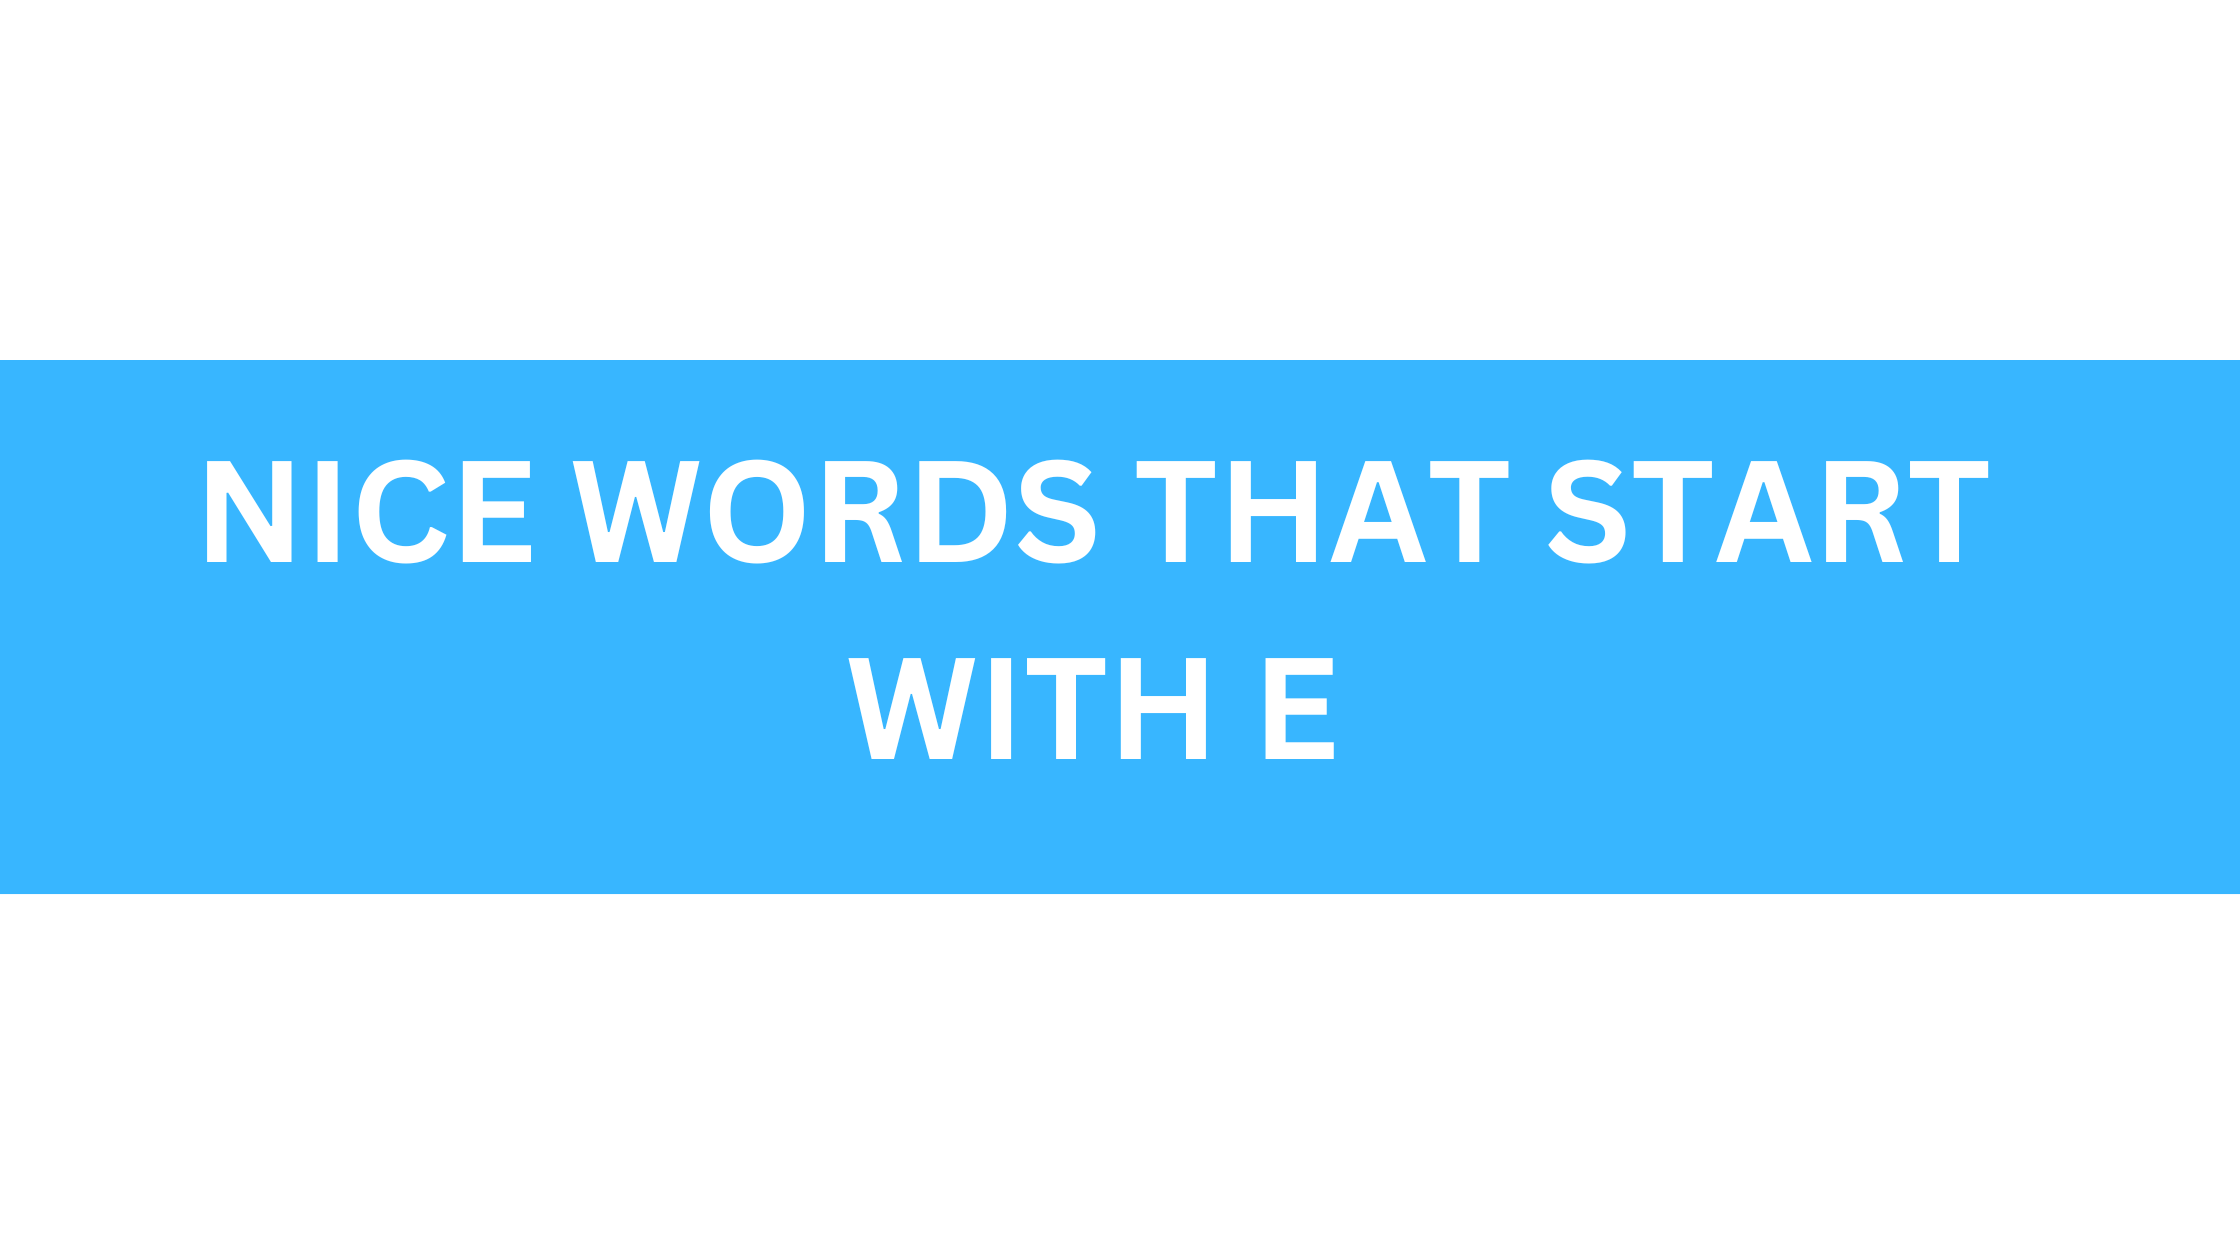 nice words that start with e